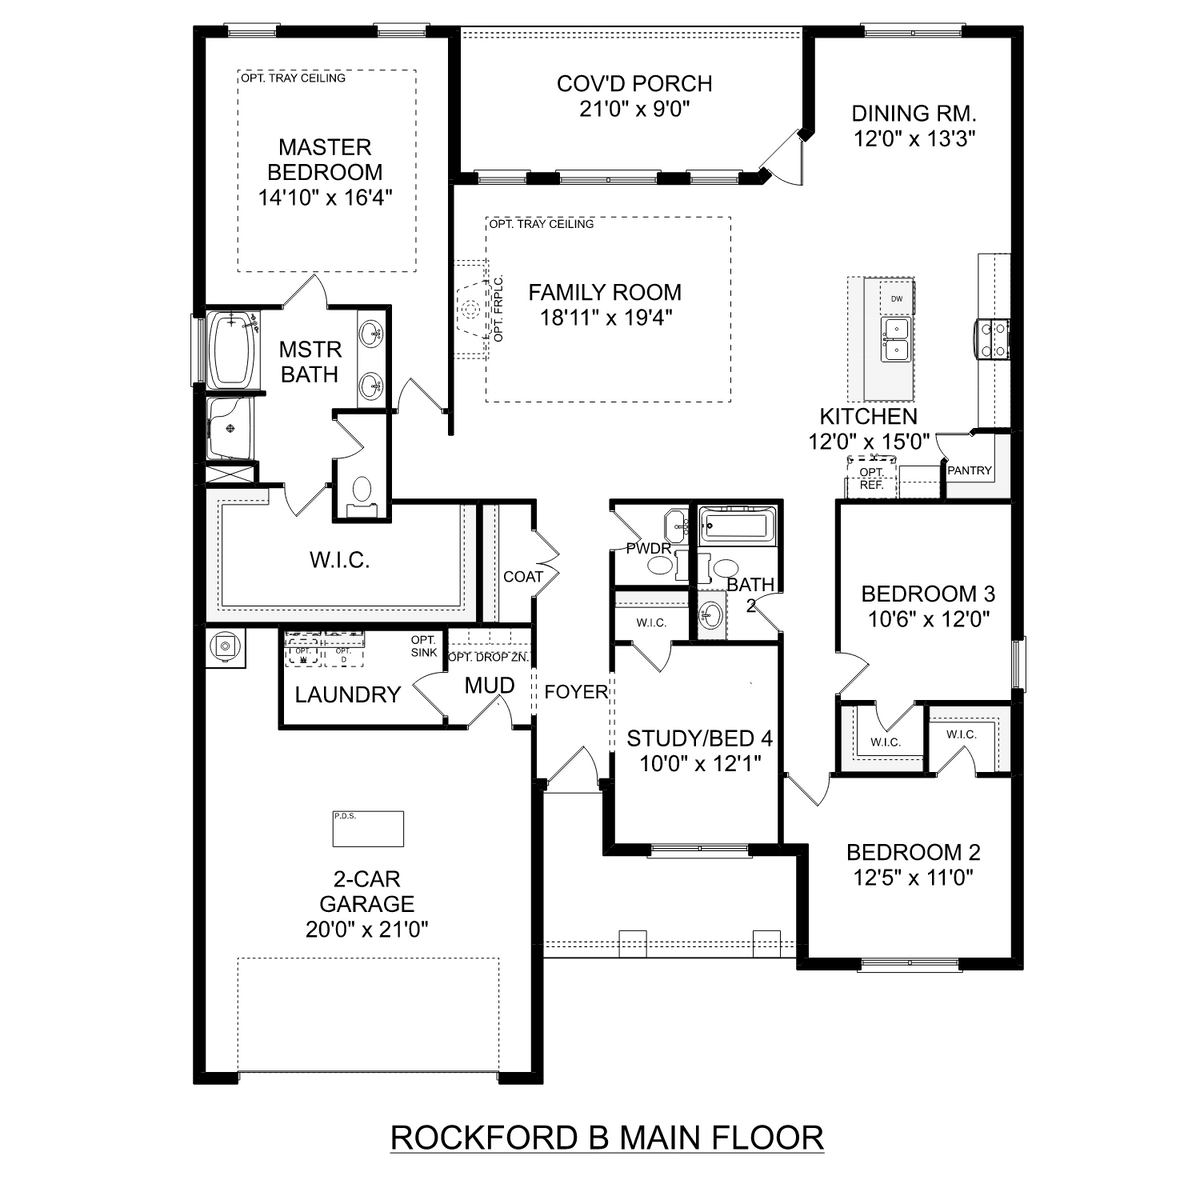 1 - The Rockford B floor plan layout for 3001 Henry Road in Davidson Homes' River Road Estates community.